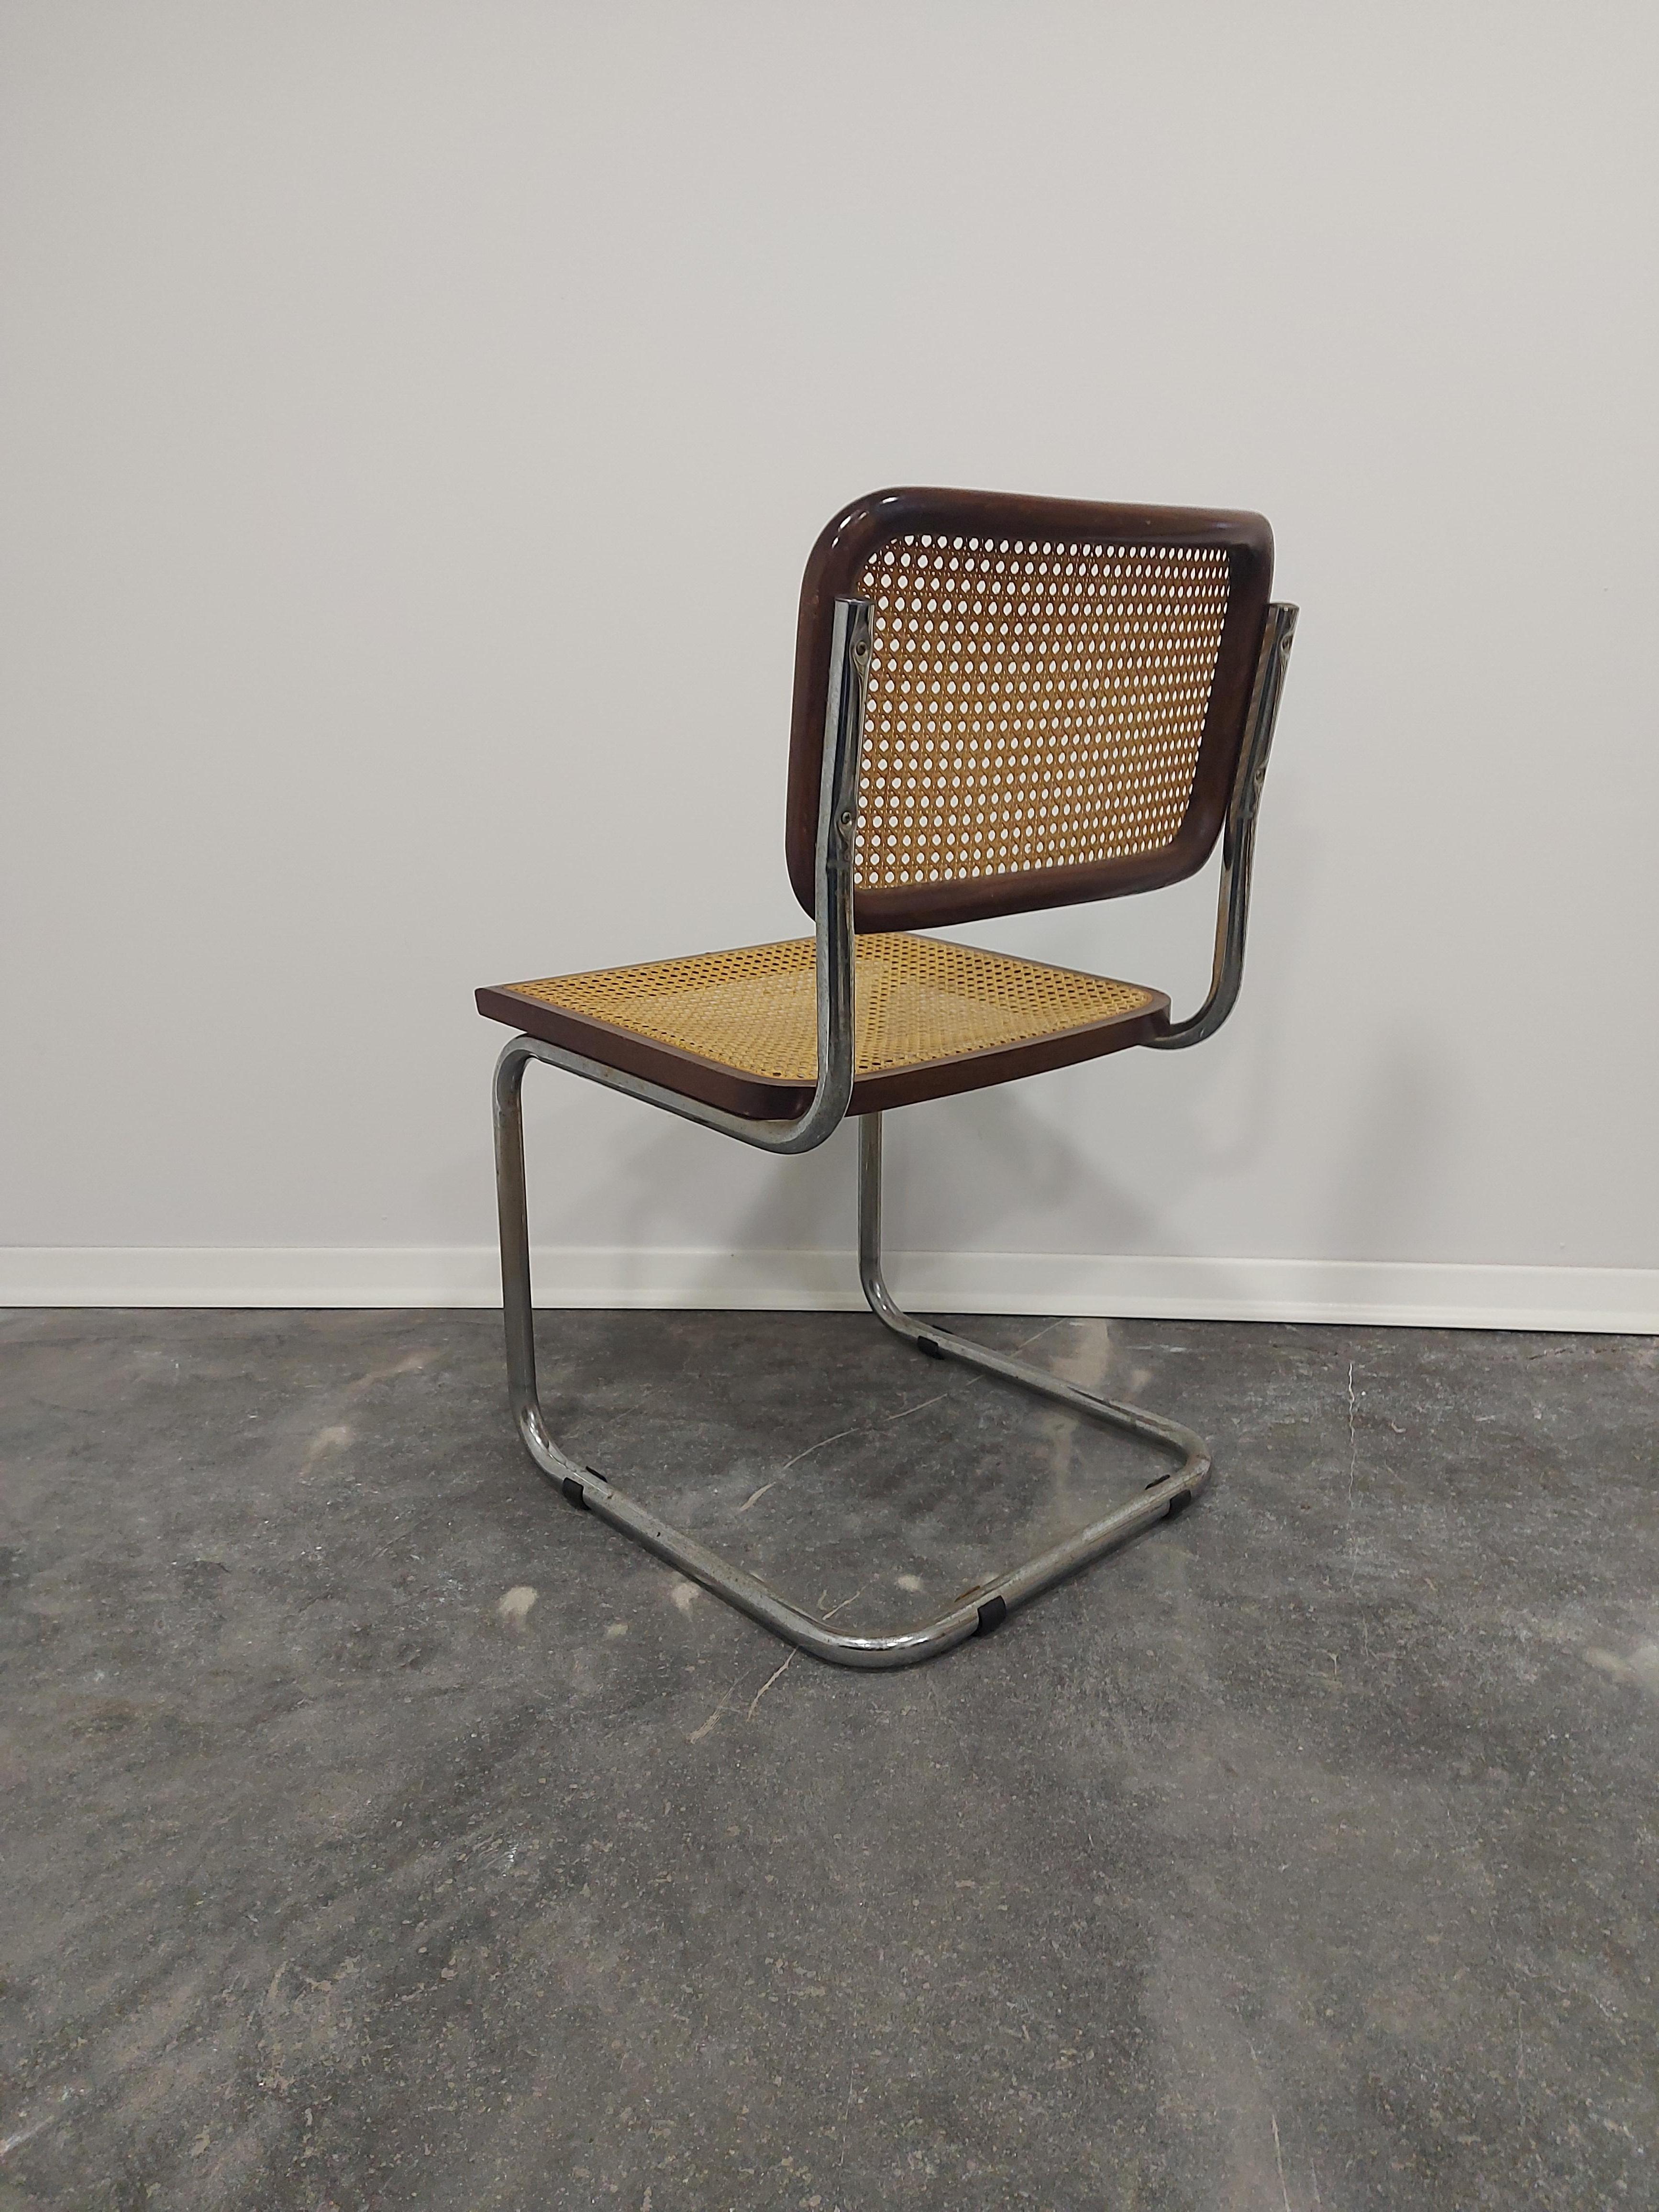 Cesca Chair by Marcel Breuer 1970s B32 1 of 5 For Sale 3